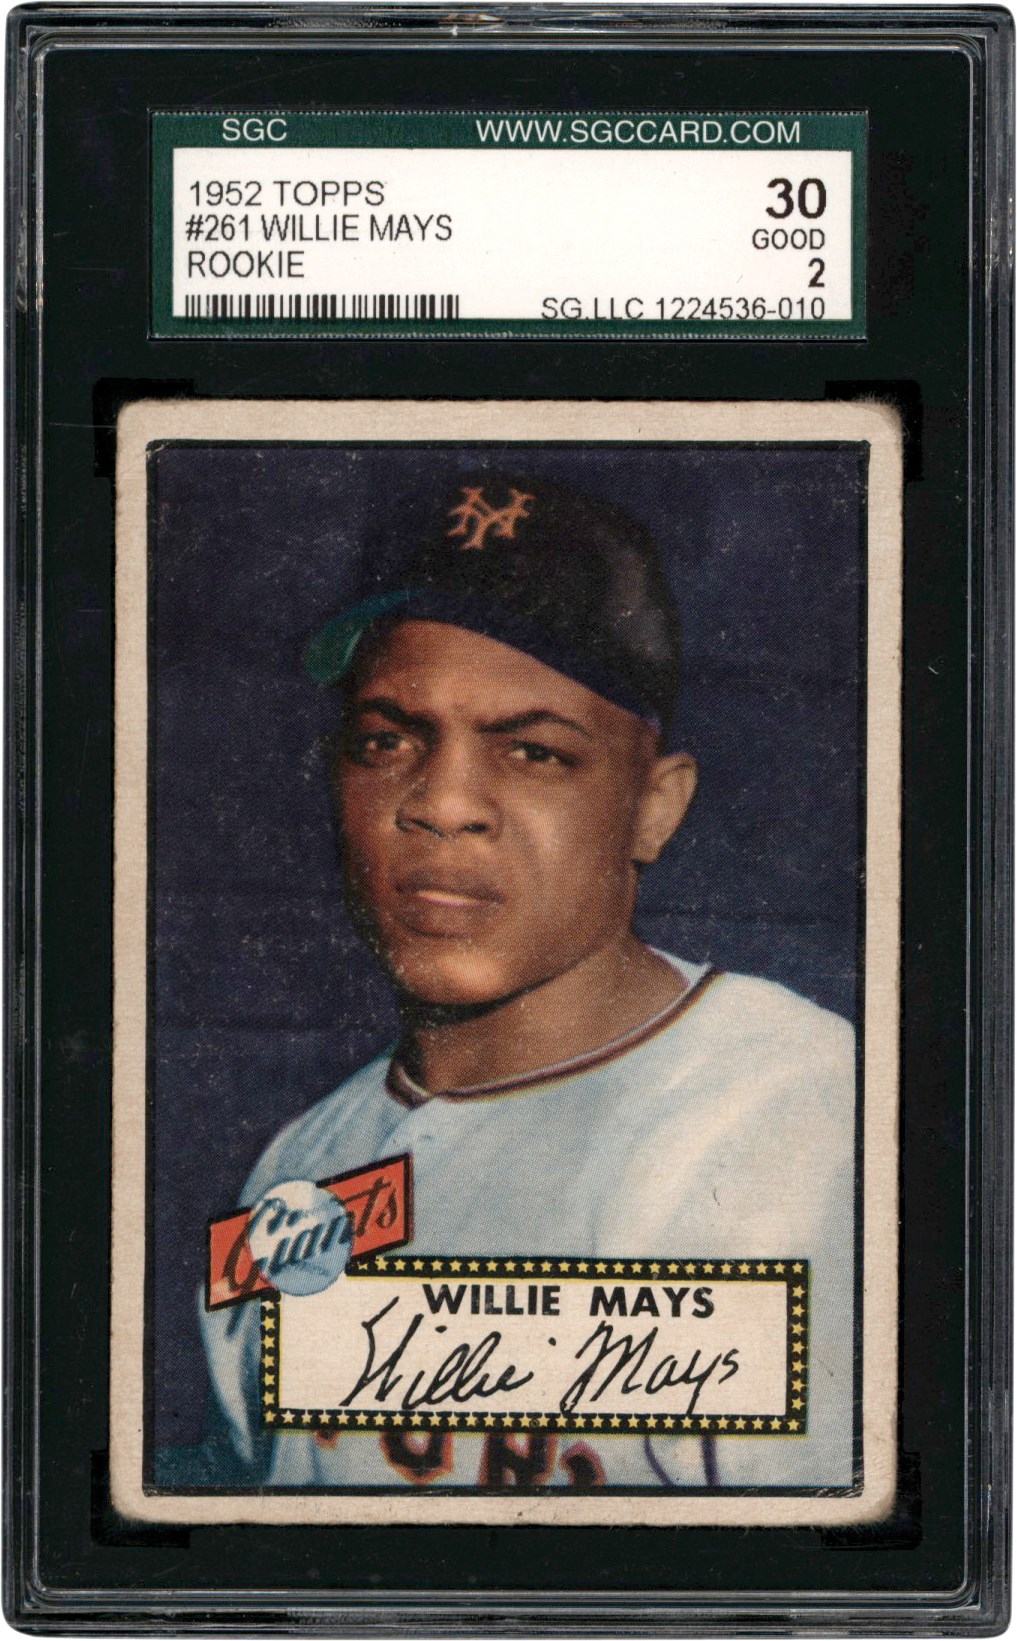 1952 Topps #261 Willie Mays SGC GD 2